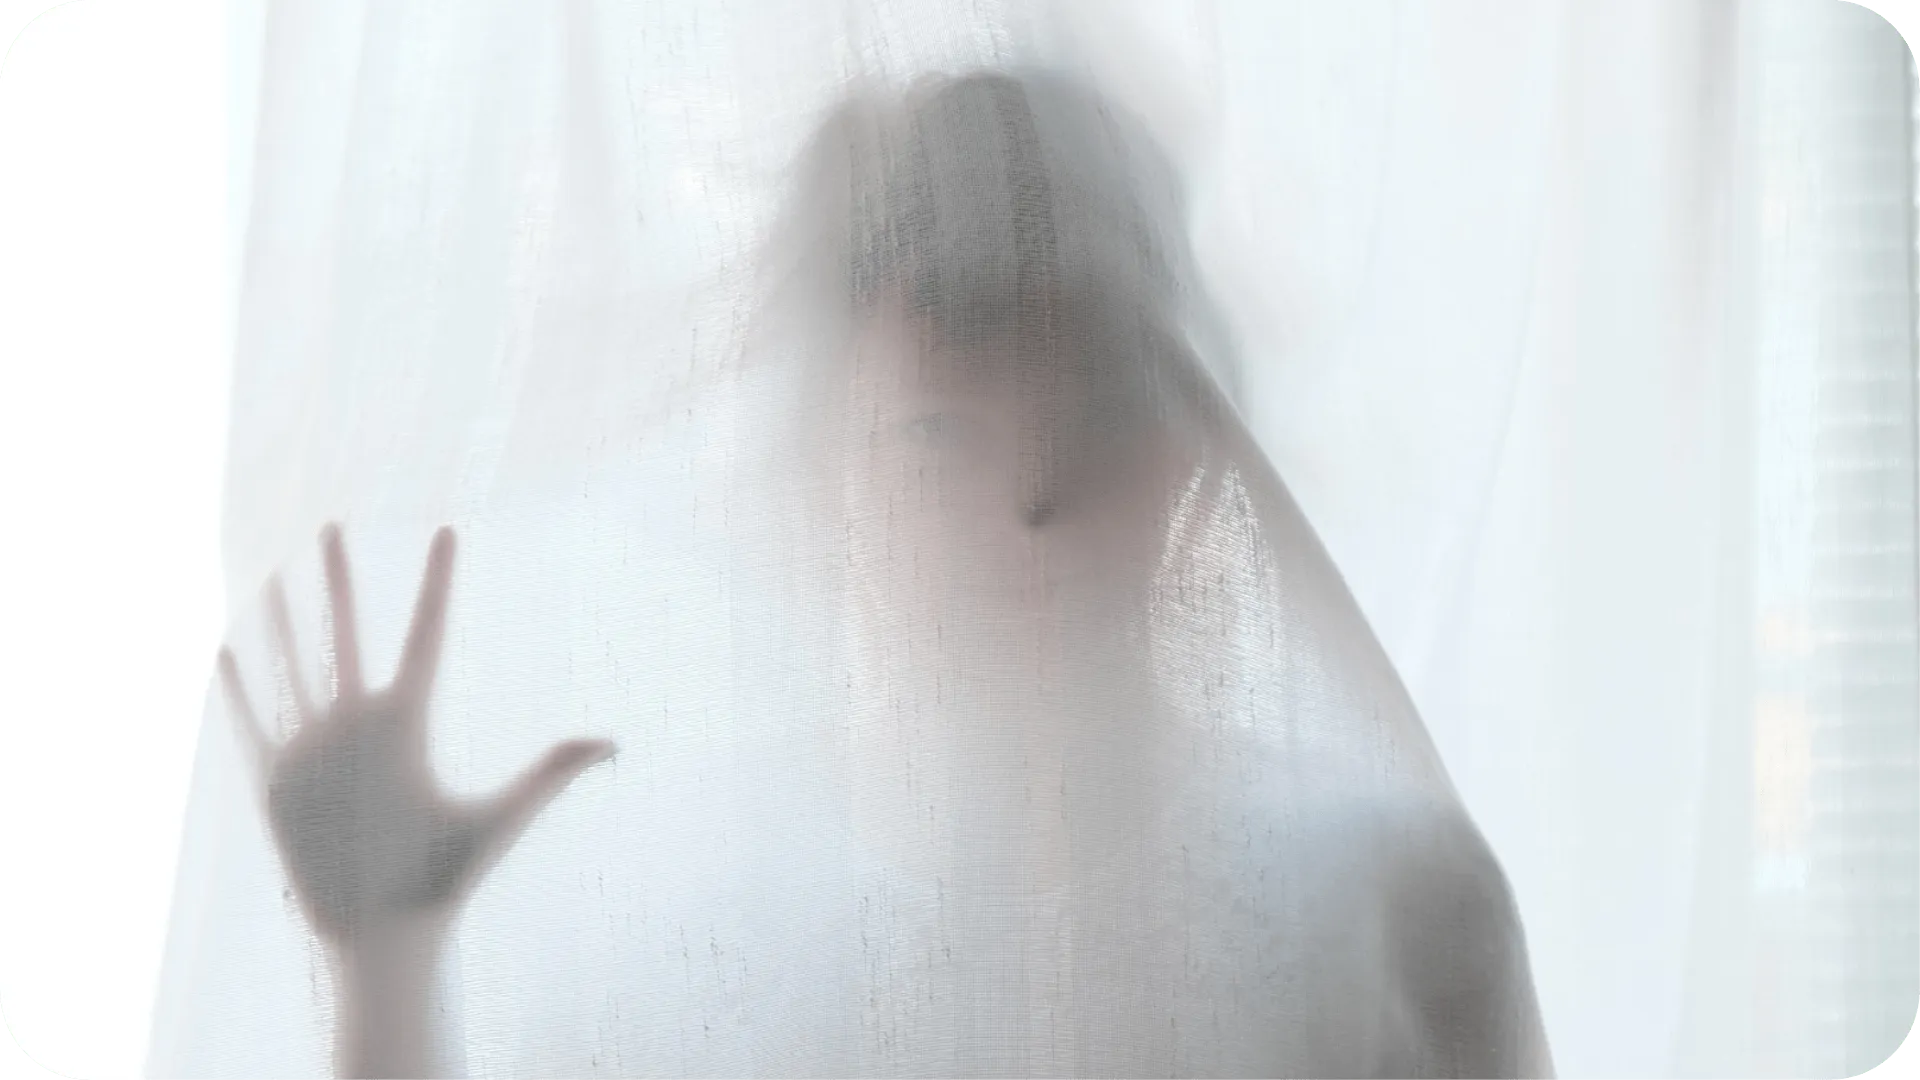 A person stood behind a white cloth, trying to communicate but unable to.